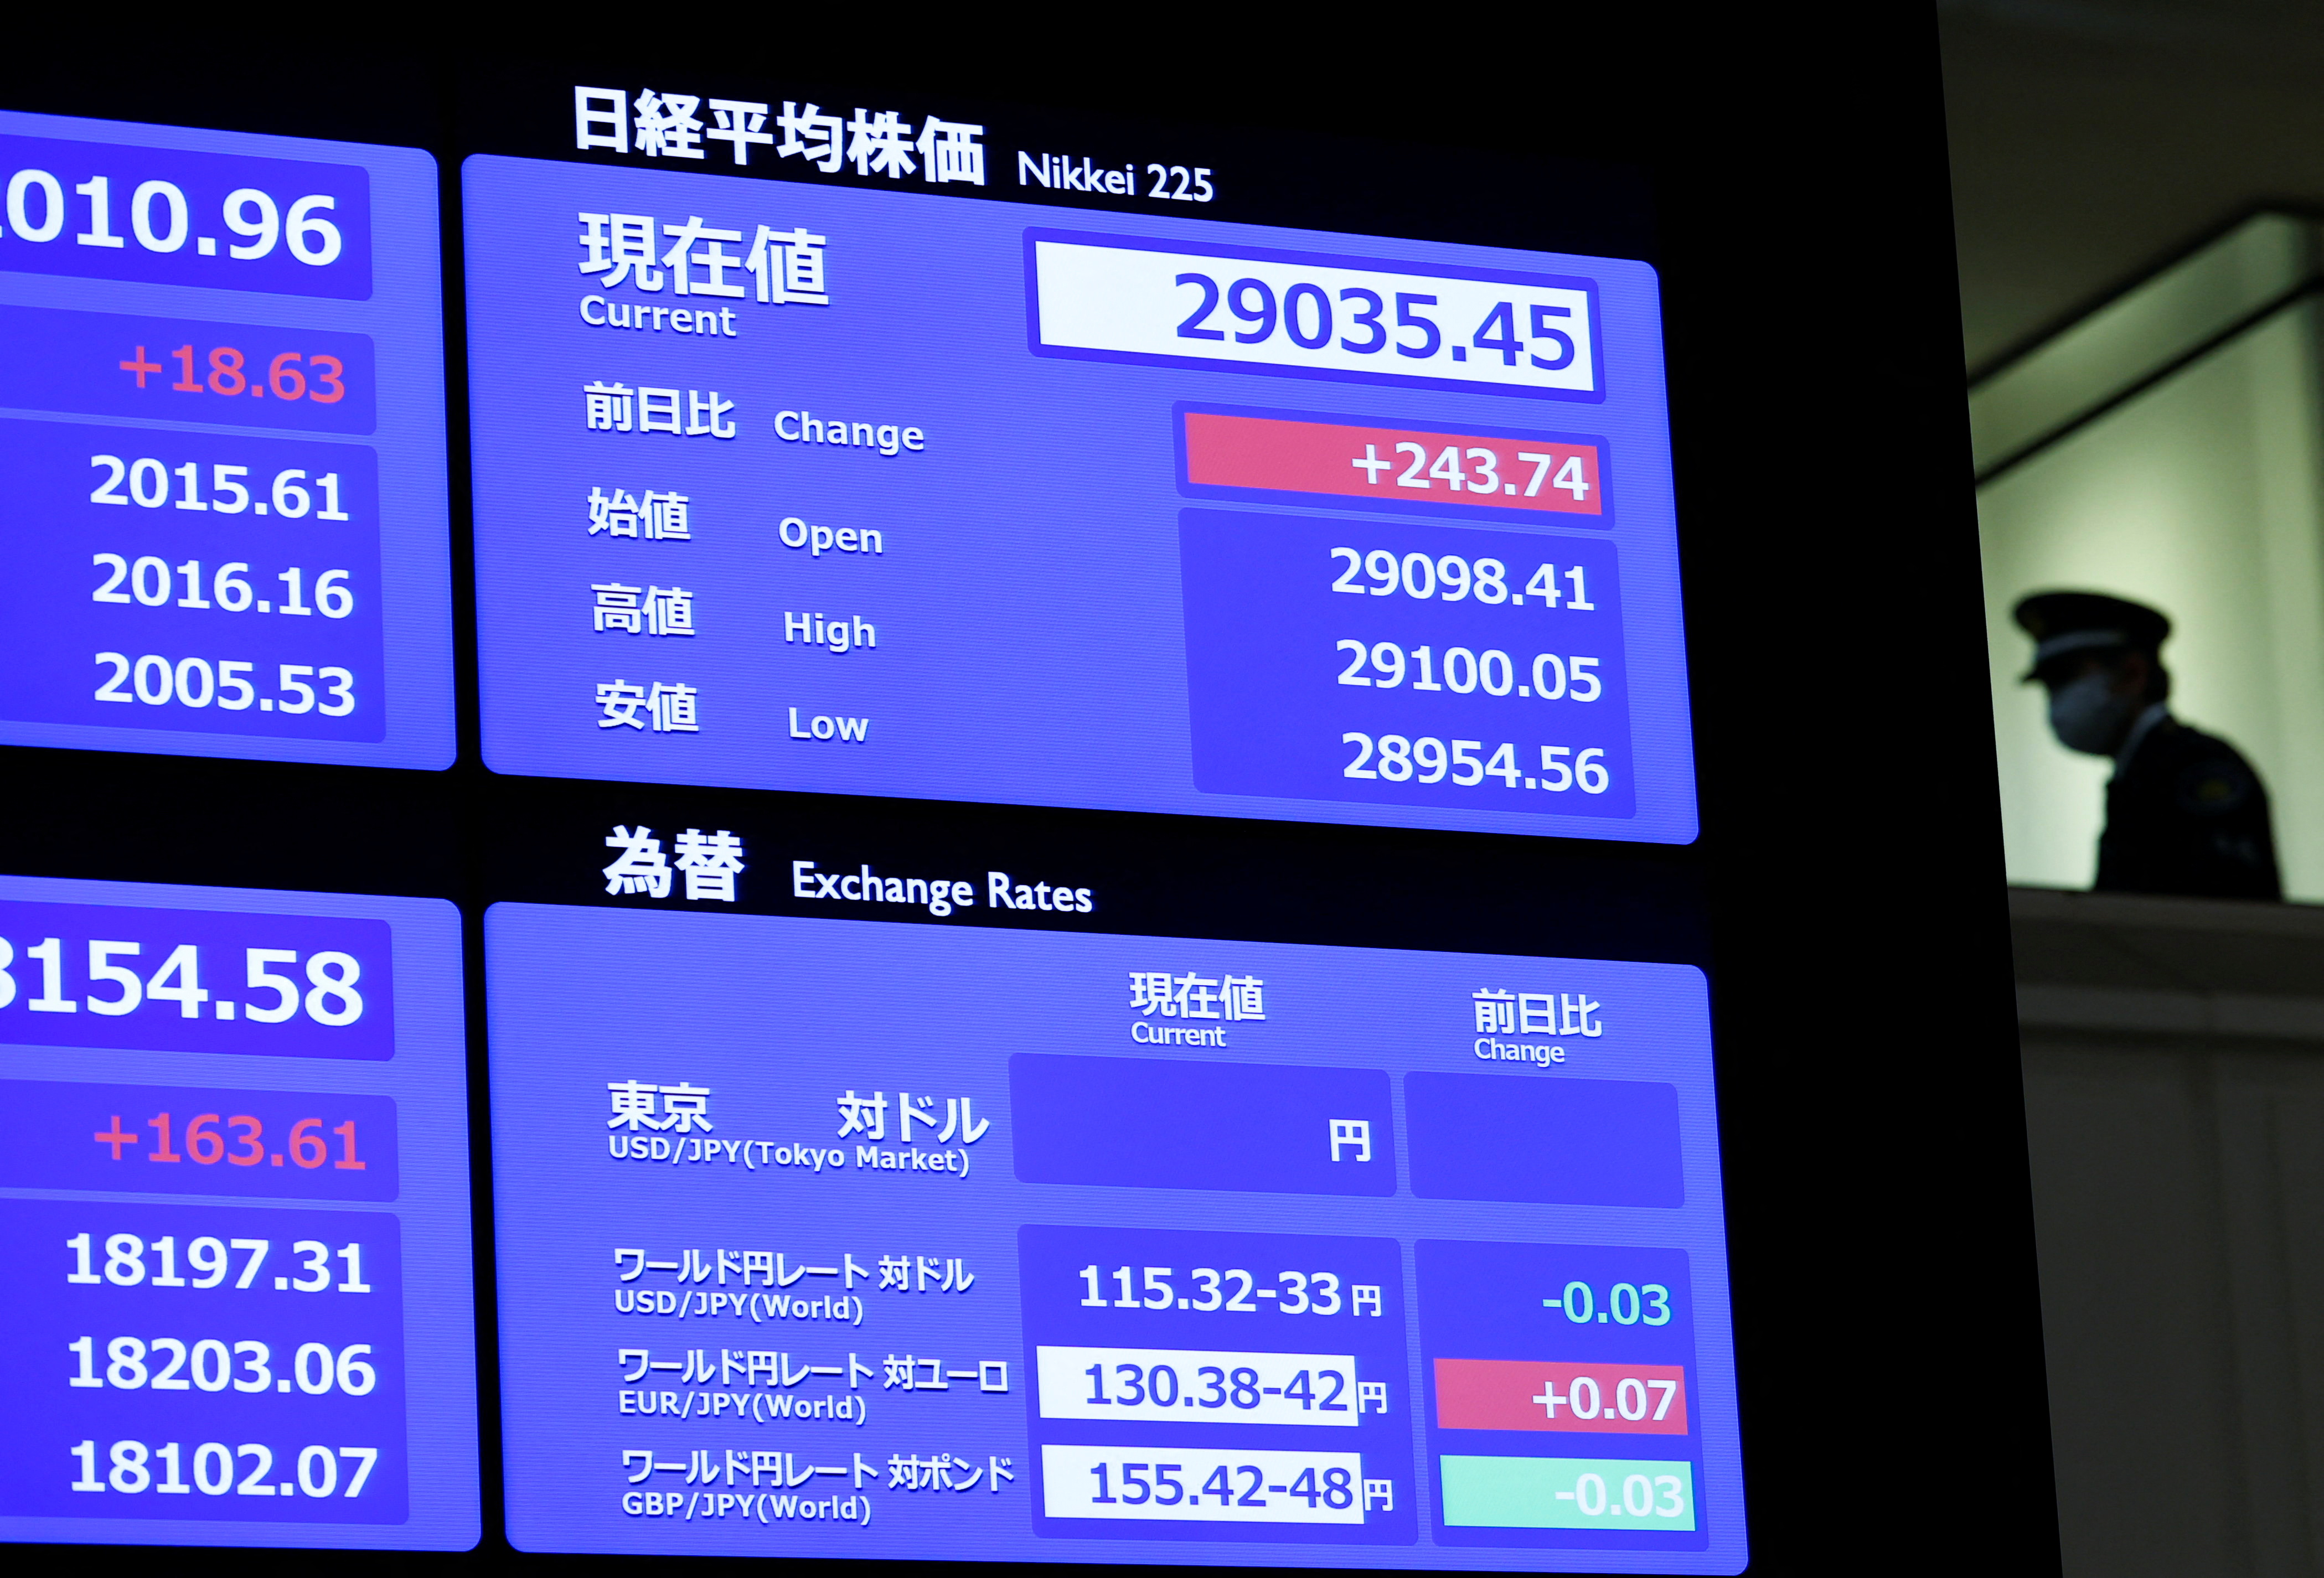 A security official is seen next to a monitor showing the stock index price and Japanese yen exchange rate against the U.S. dollar at the Tokyo Stock Exchange in Tokyo